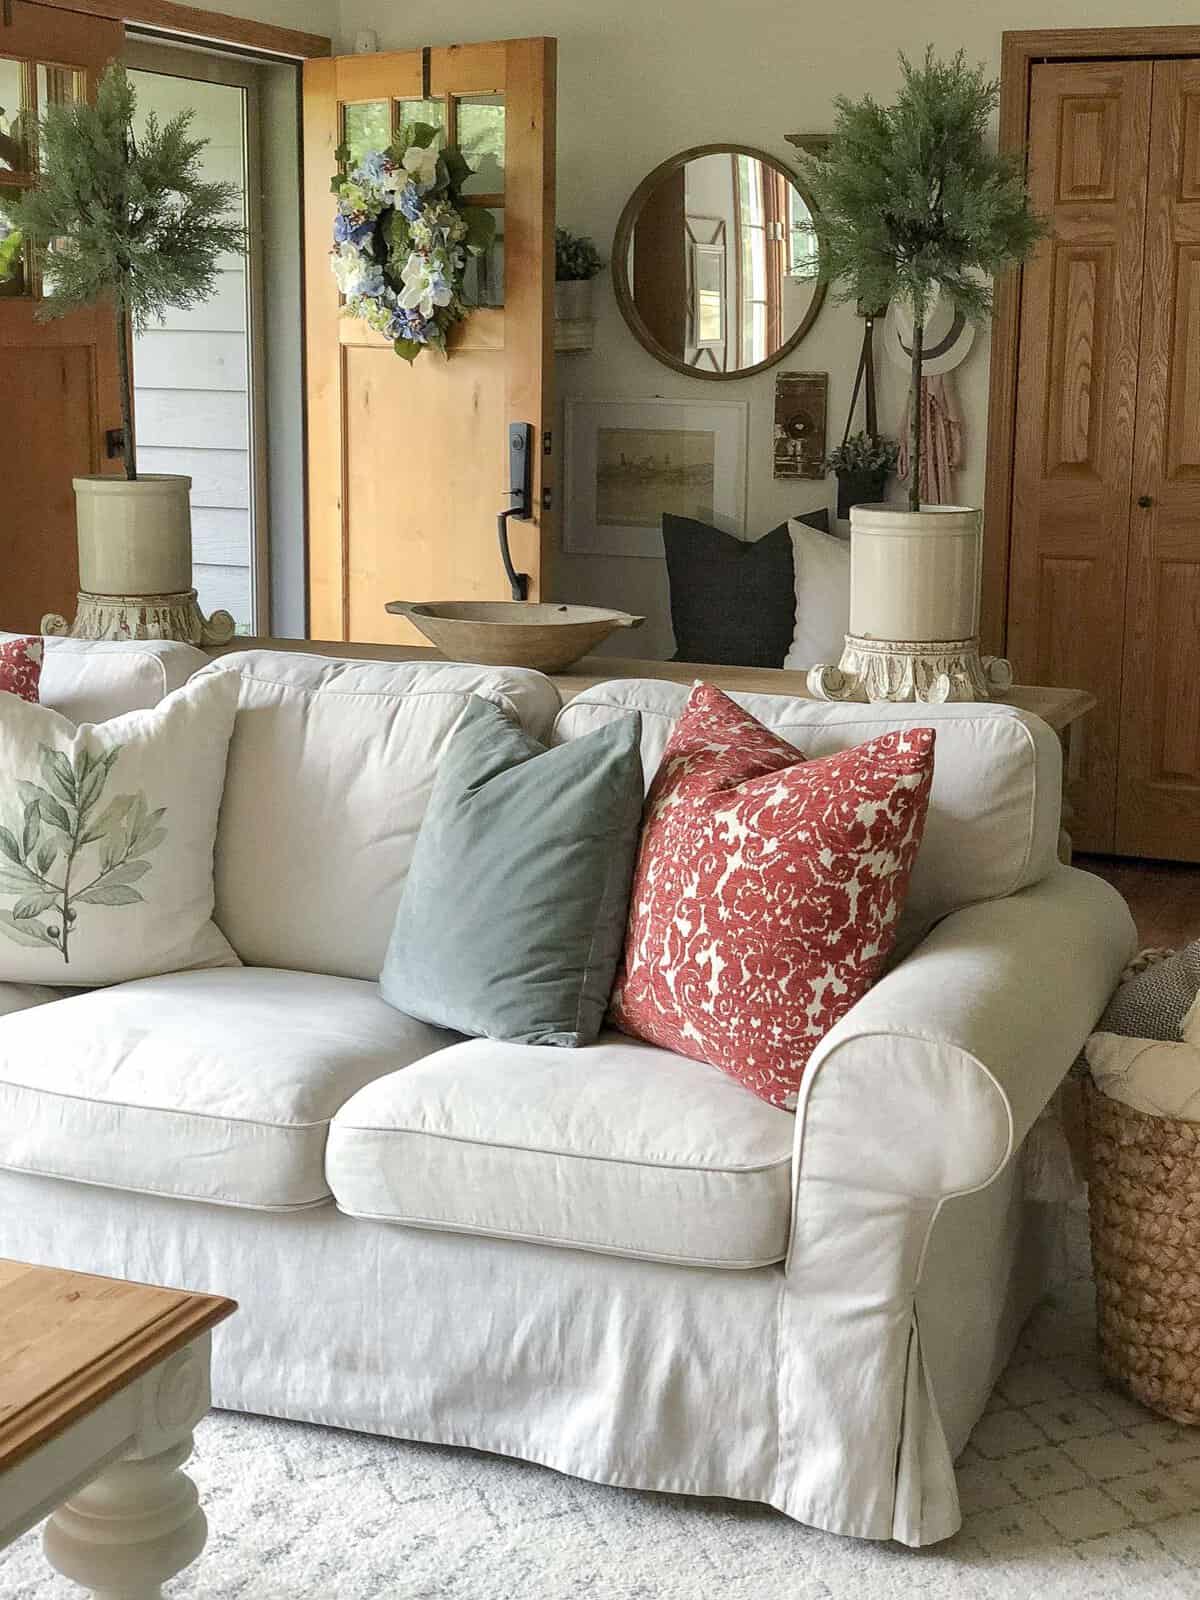 As summer eases into fall I've gathered some beautiful decor that spans the seasons! It's all about transitioning home decor from summer to fall with ease.